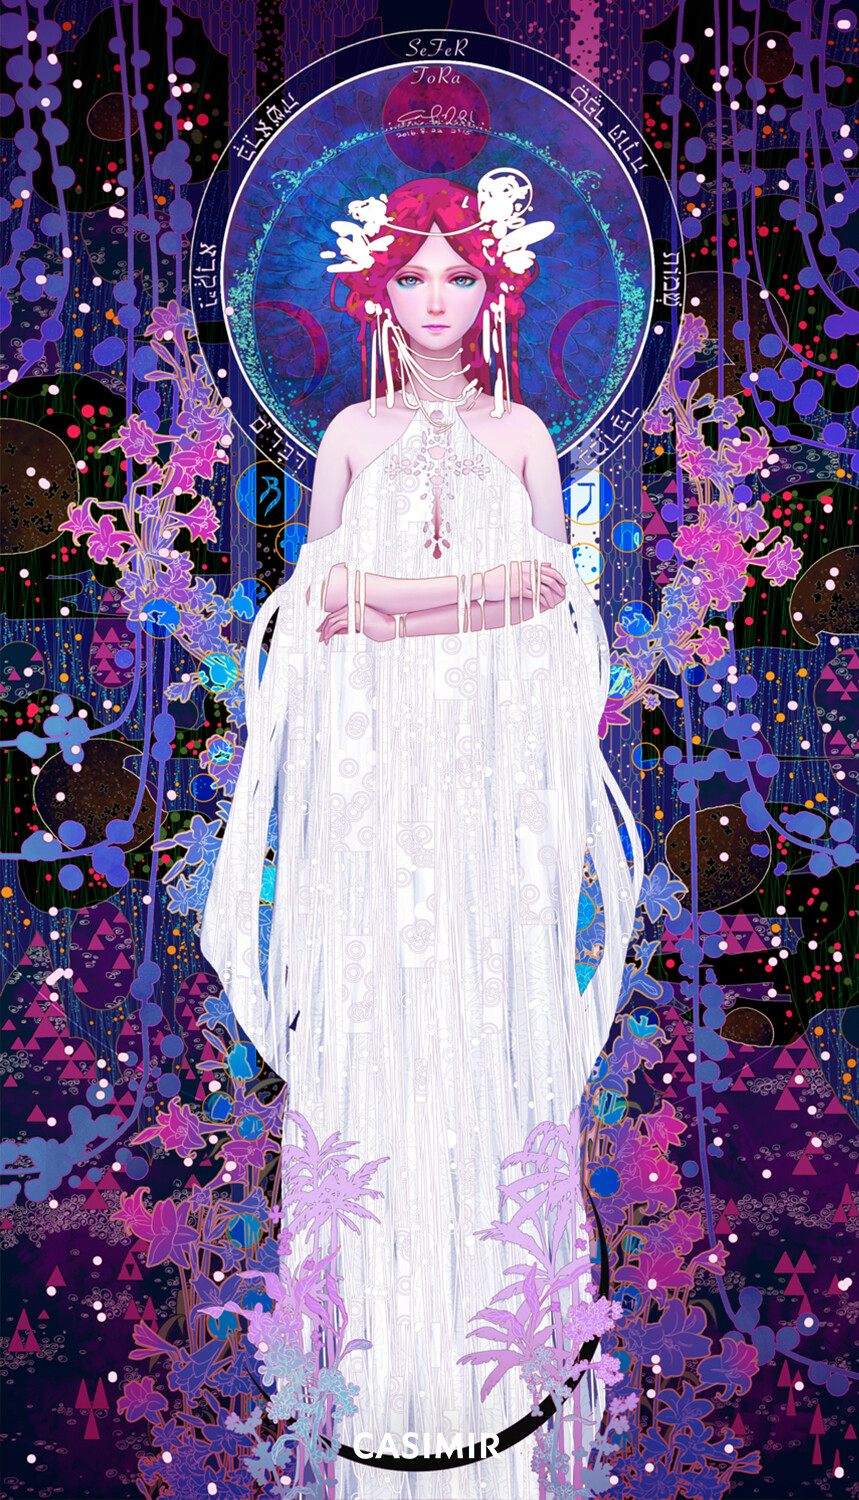 2.The High Priestess / 大祭司

Details
-------------------------------------- 
Limited Edition of 30
Size : 40(W) x 70(H) cm
Numbered and signed COA 
12 colors high quality print on watercolor paper
--------------------------------------